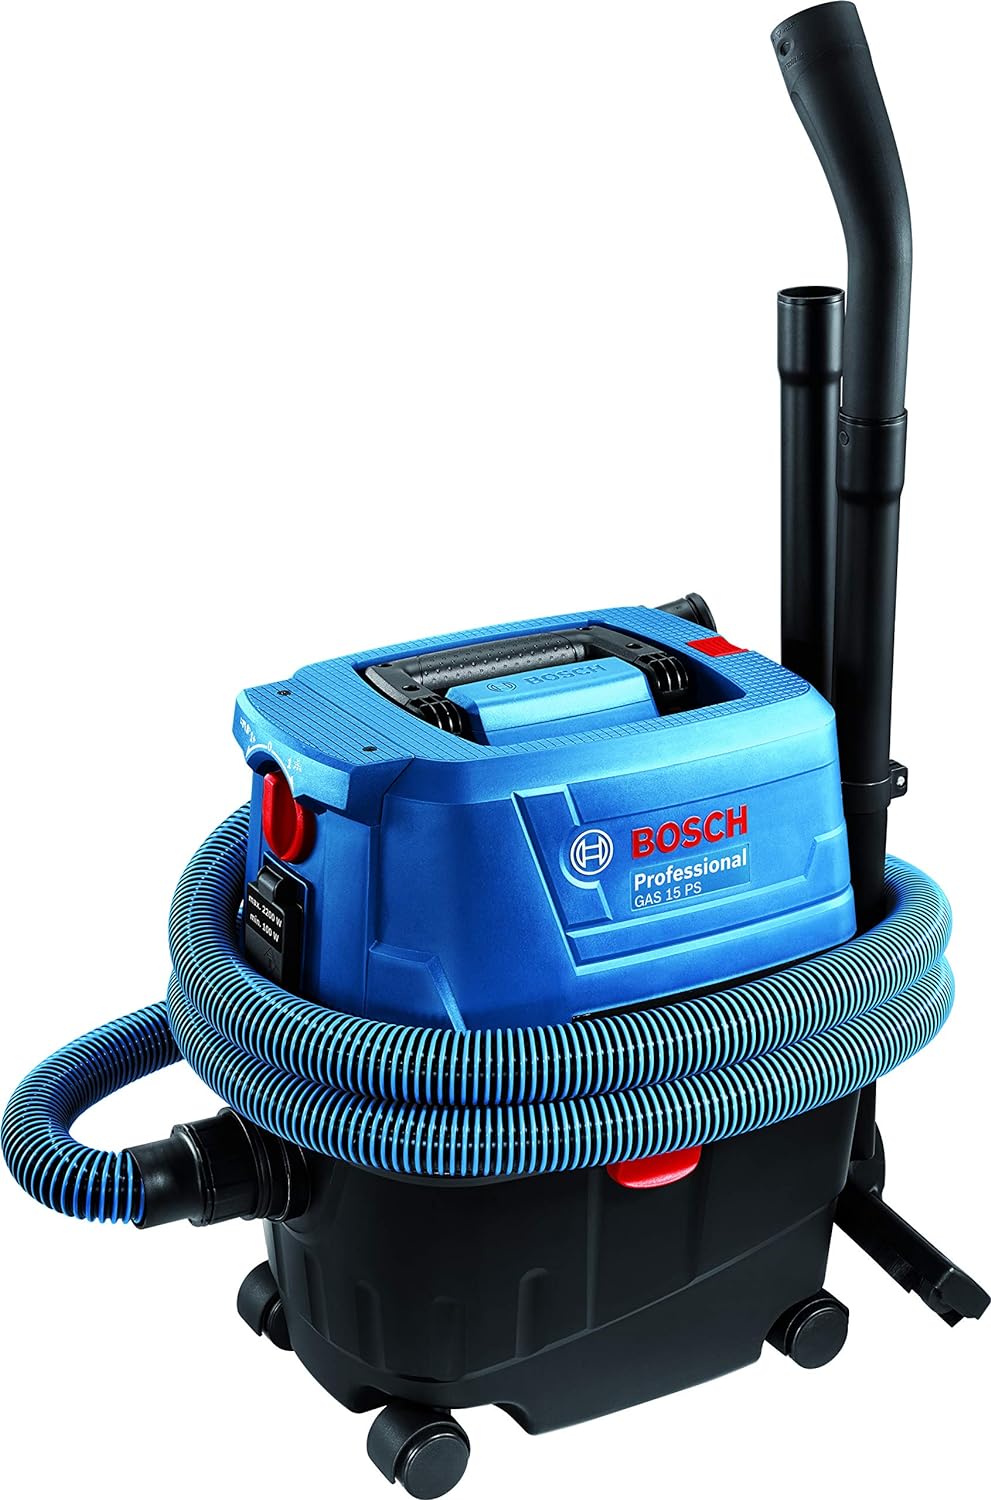 Bosch GAS 15 PS Heavy duty, Wet and dry corded, 1100 watt vacuum cleaner